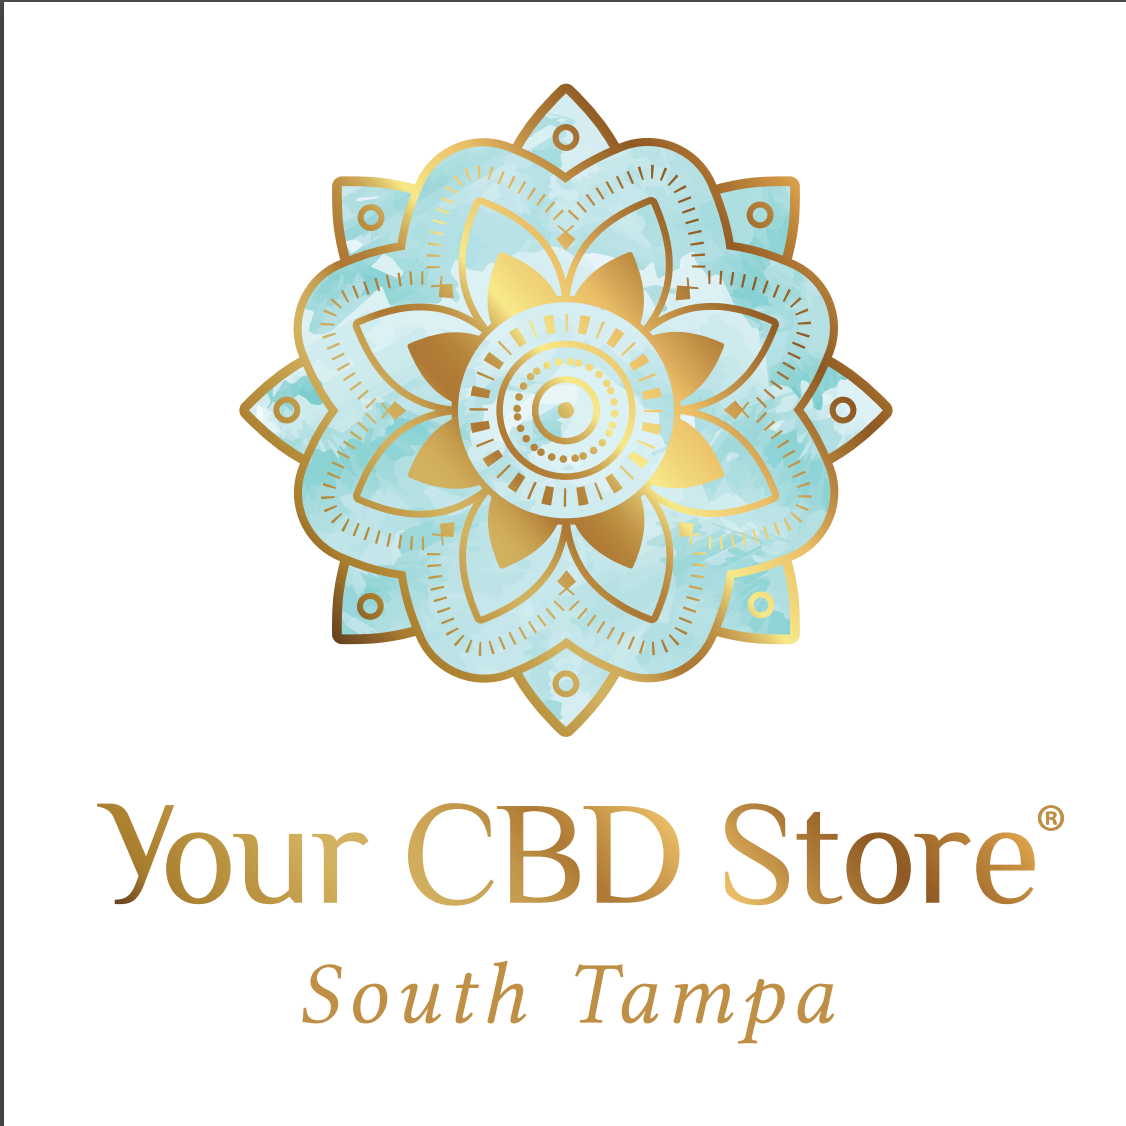 Your CBD Store - South Tampa, FL Logo